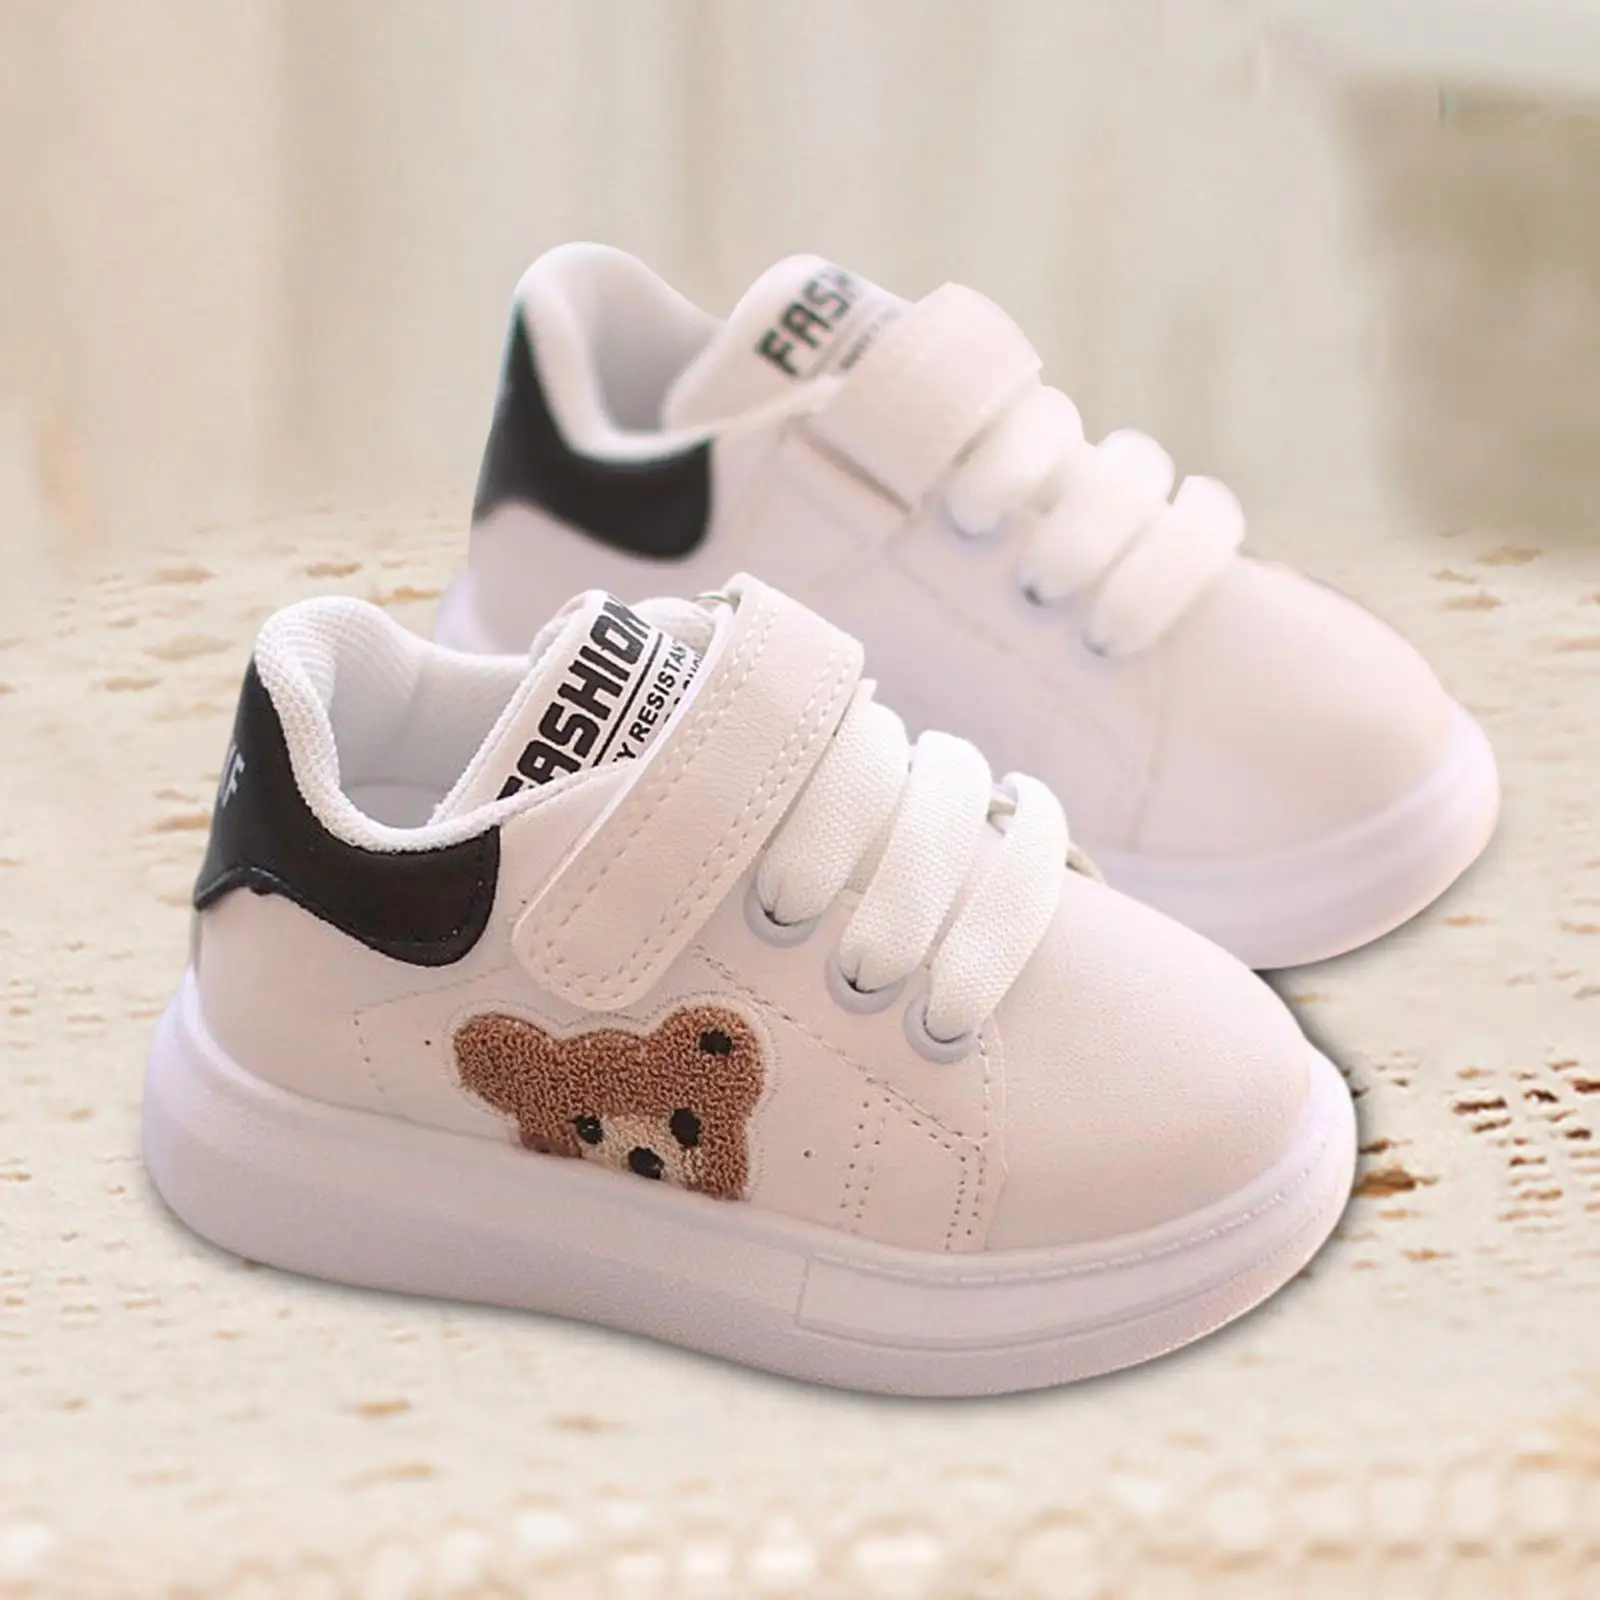 Infant Sneakers Waterproof Crib Trainers Casual for Unisex Child Newborns